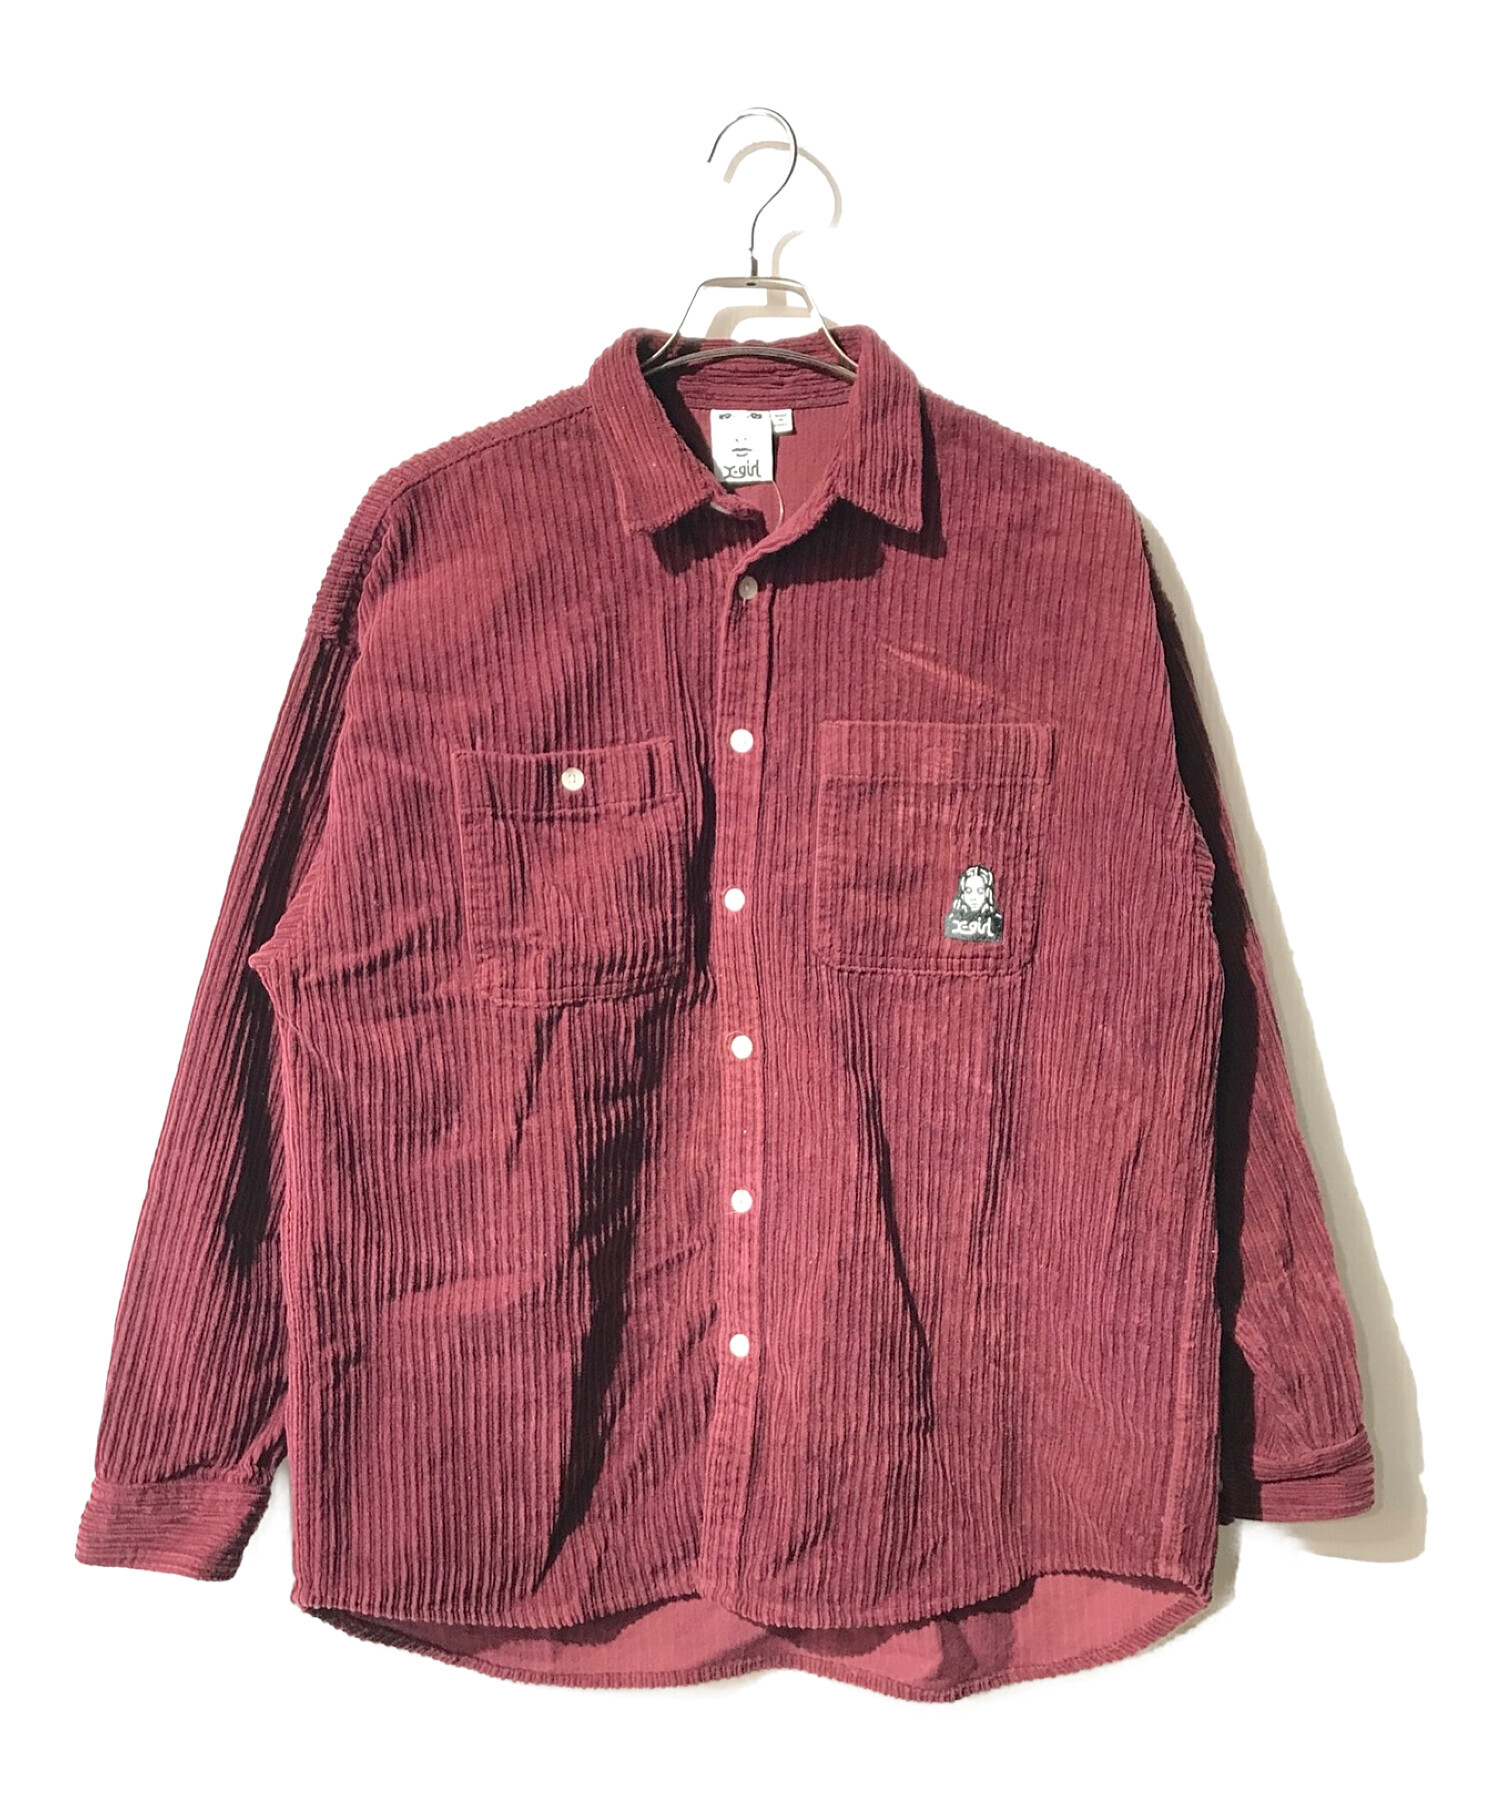 X-girl (エックスガール) FACE EMBROIDERY CORDUROY SHIRT レッド サイズ:Ⅿ